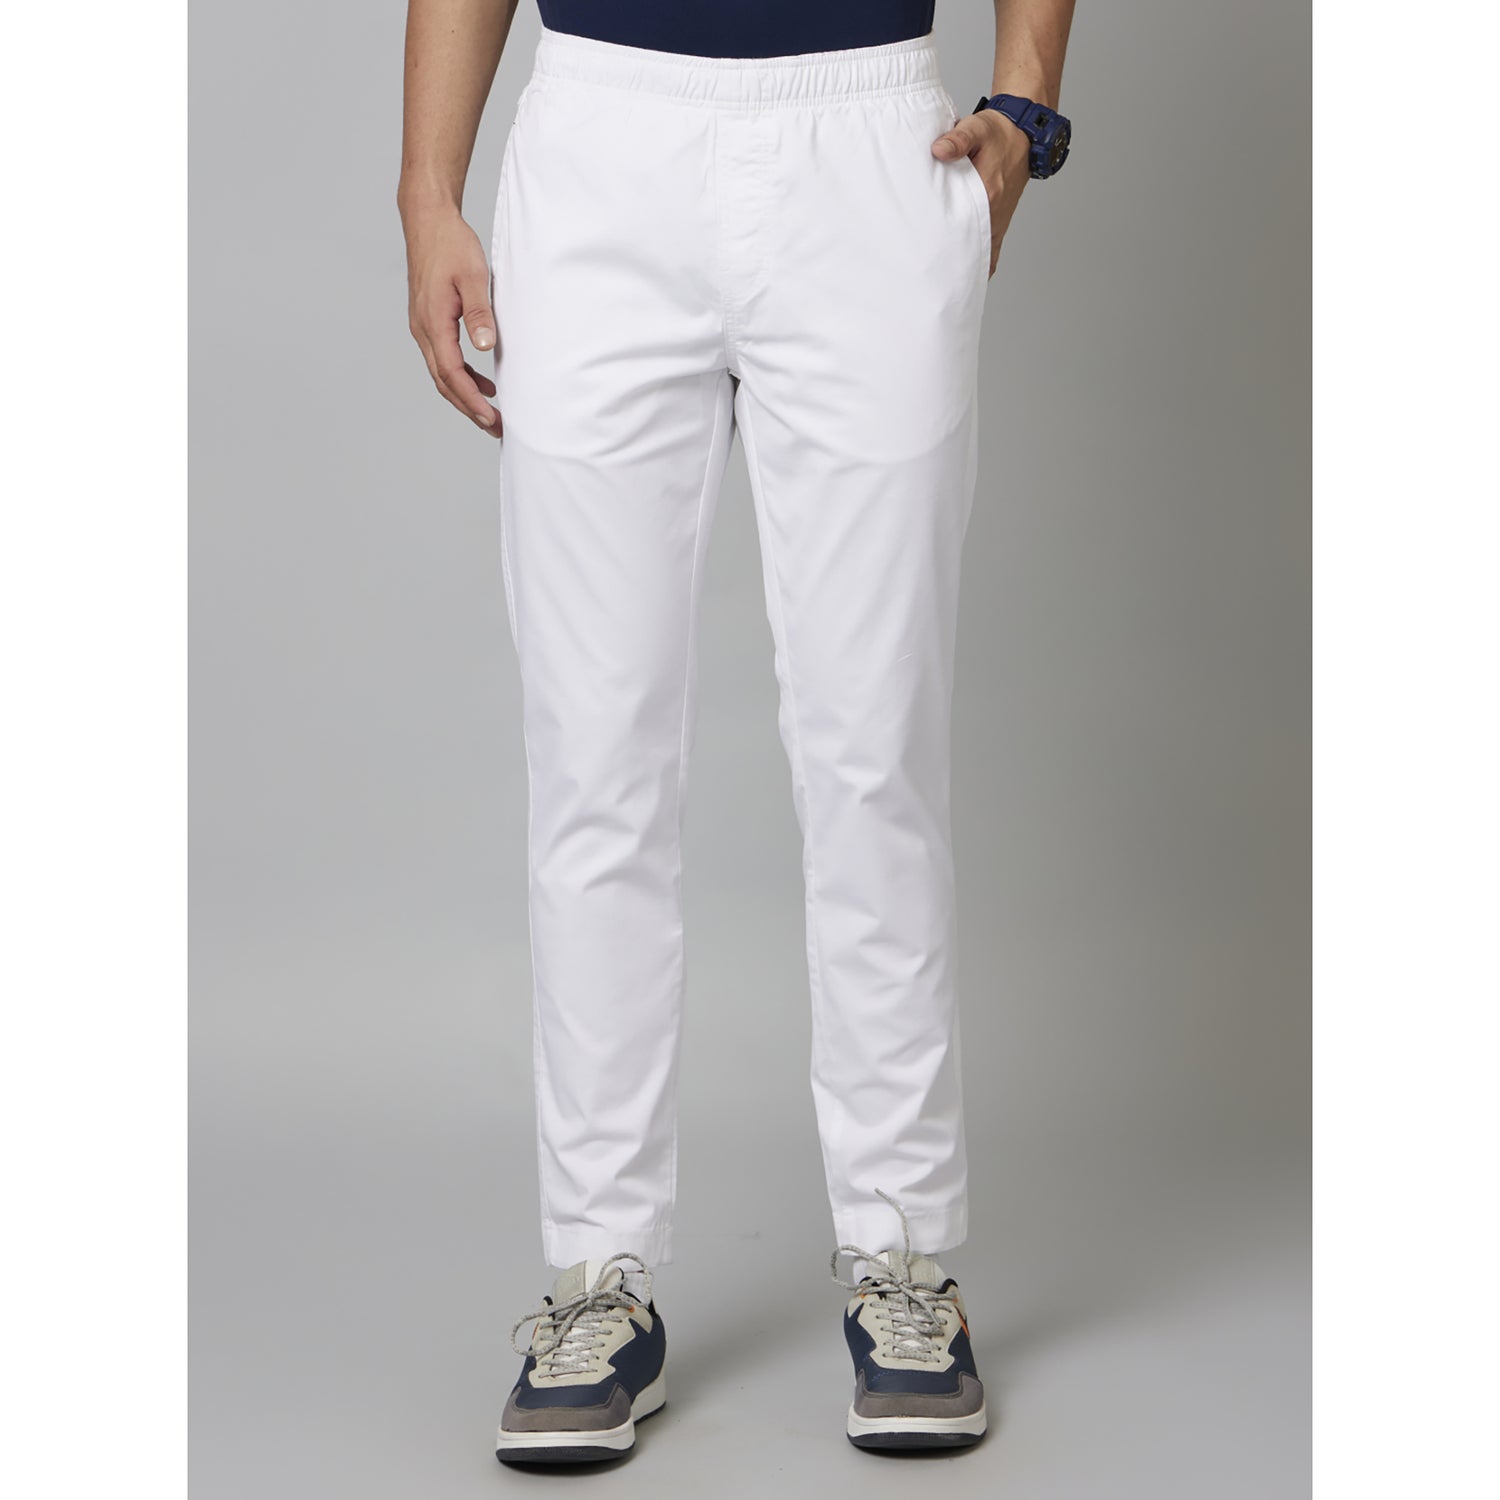 White Solid Cotton Poly Blend Trousers (DOMAX5)